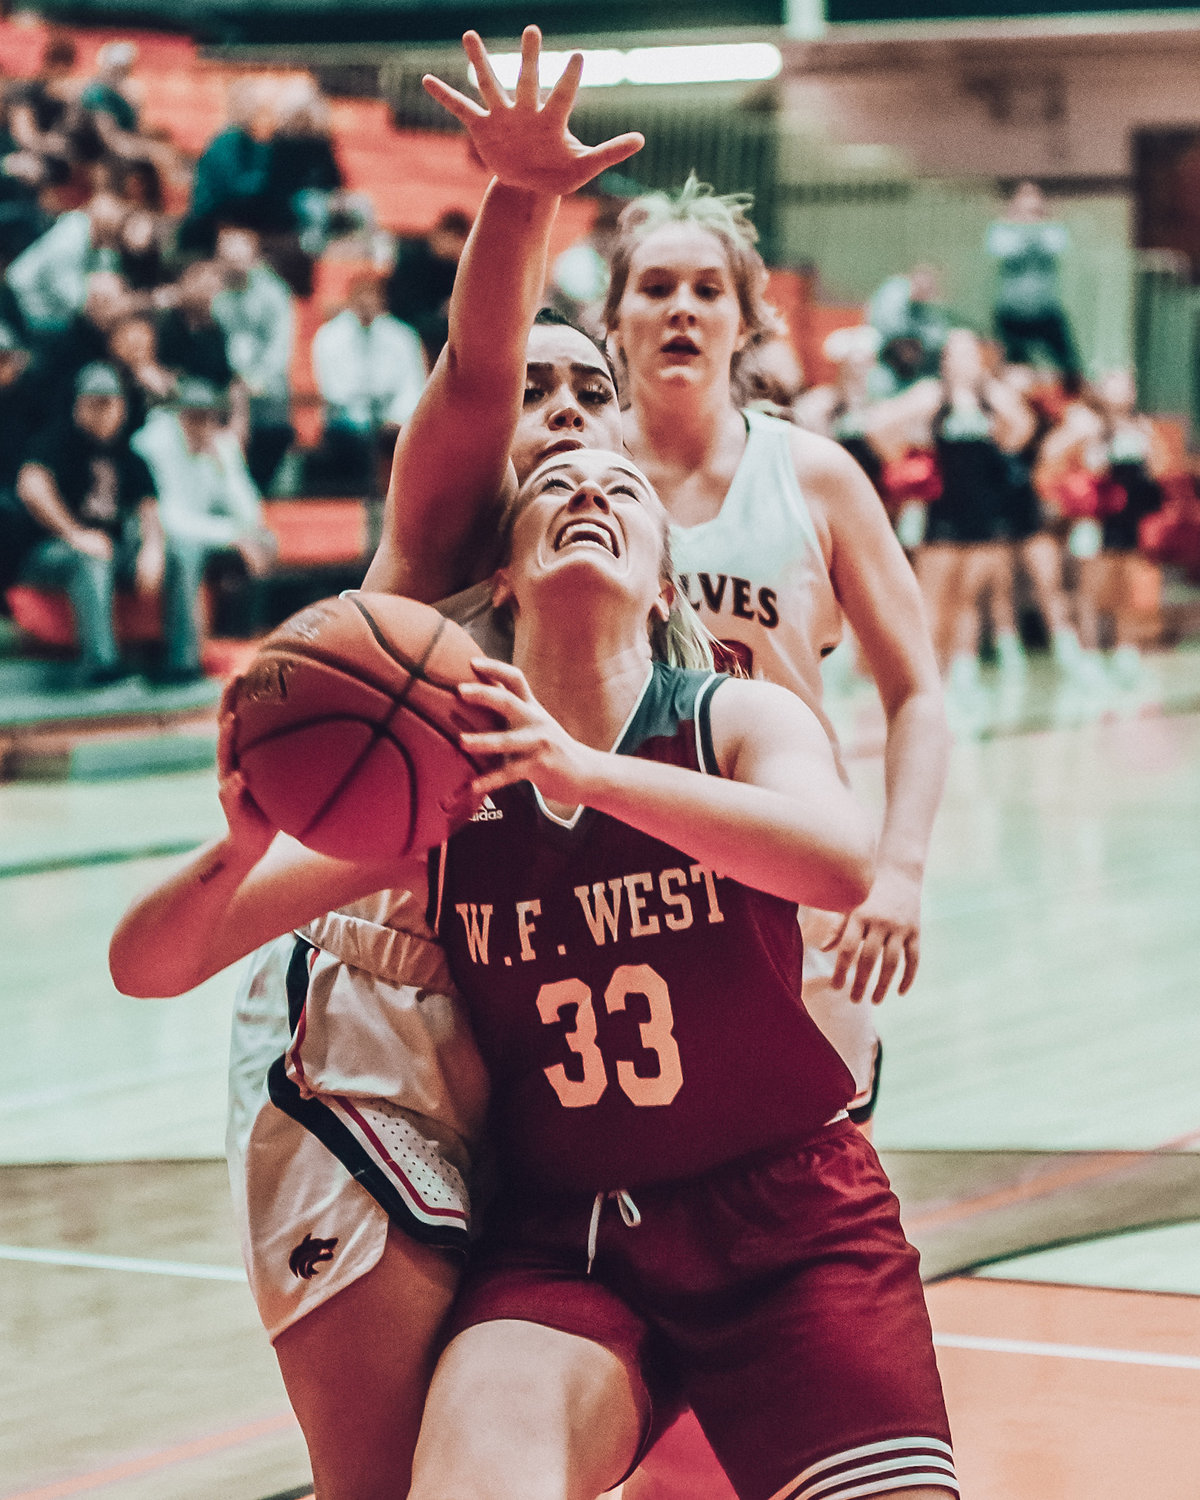 W.F. West's Annika Waring looks for room to shoot against Black Hills on Friday during the District 4 2A Girls Basketball Tournament championship game in Battle Ground.